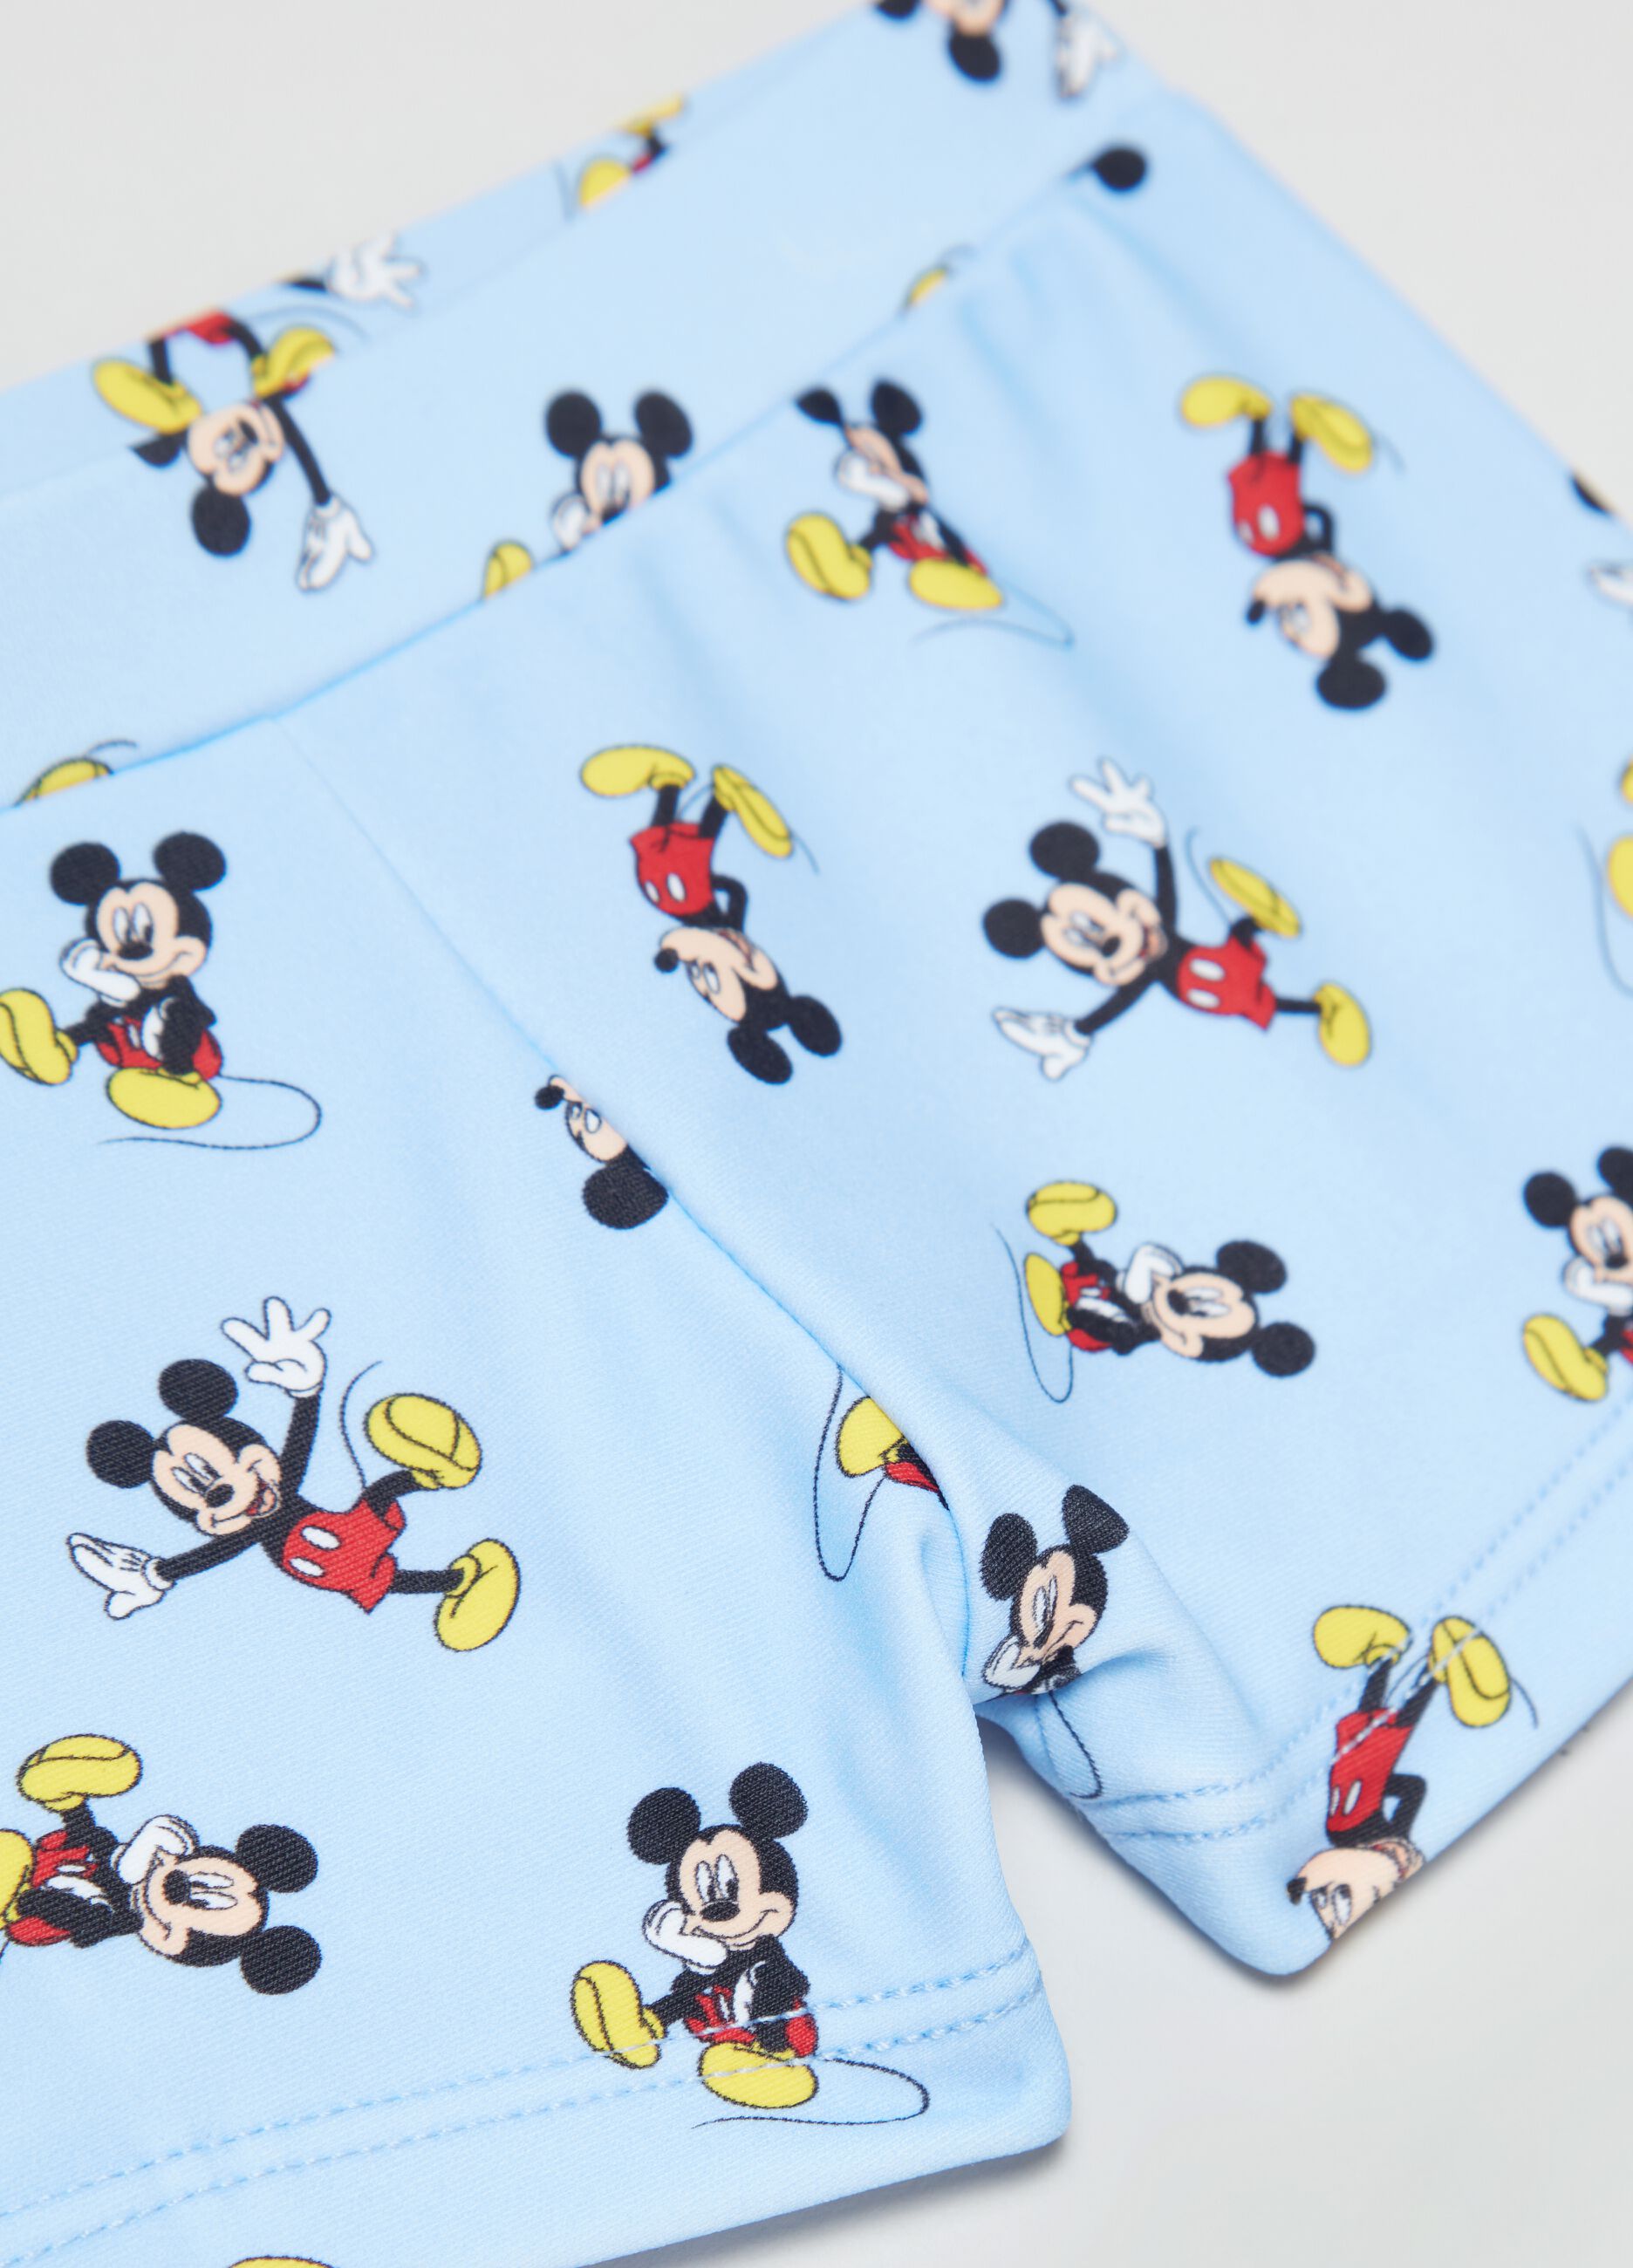 Swimming trunks with Mickey Mouse print